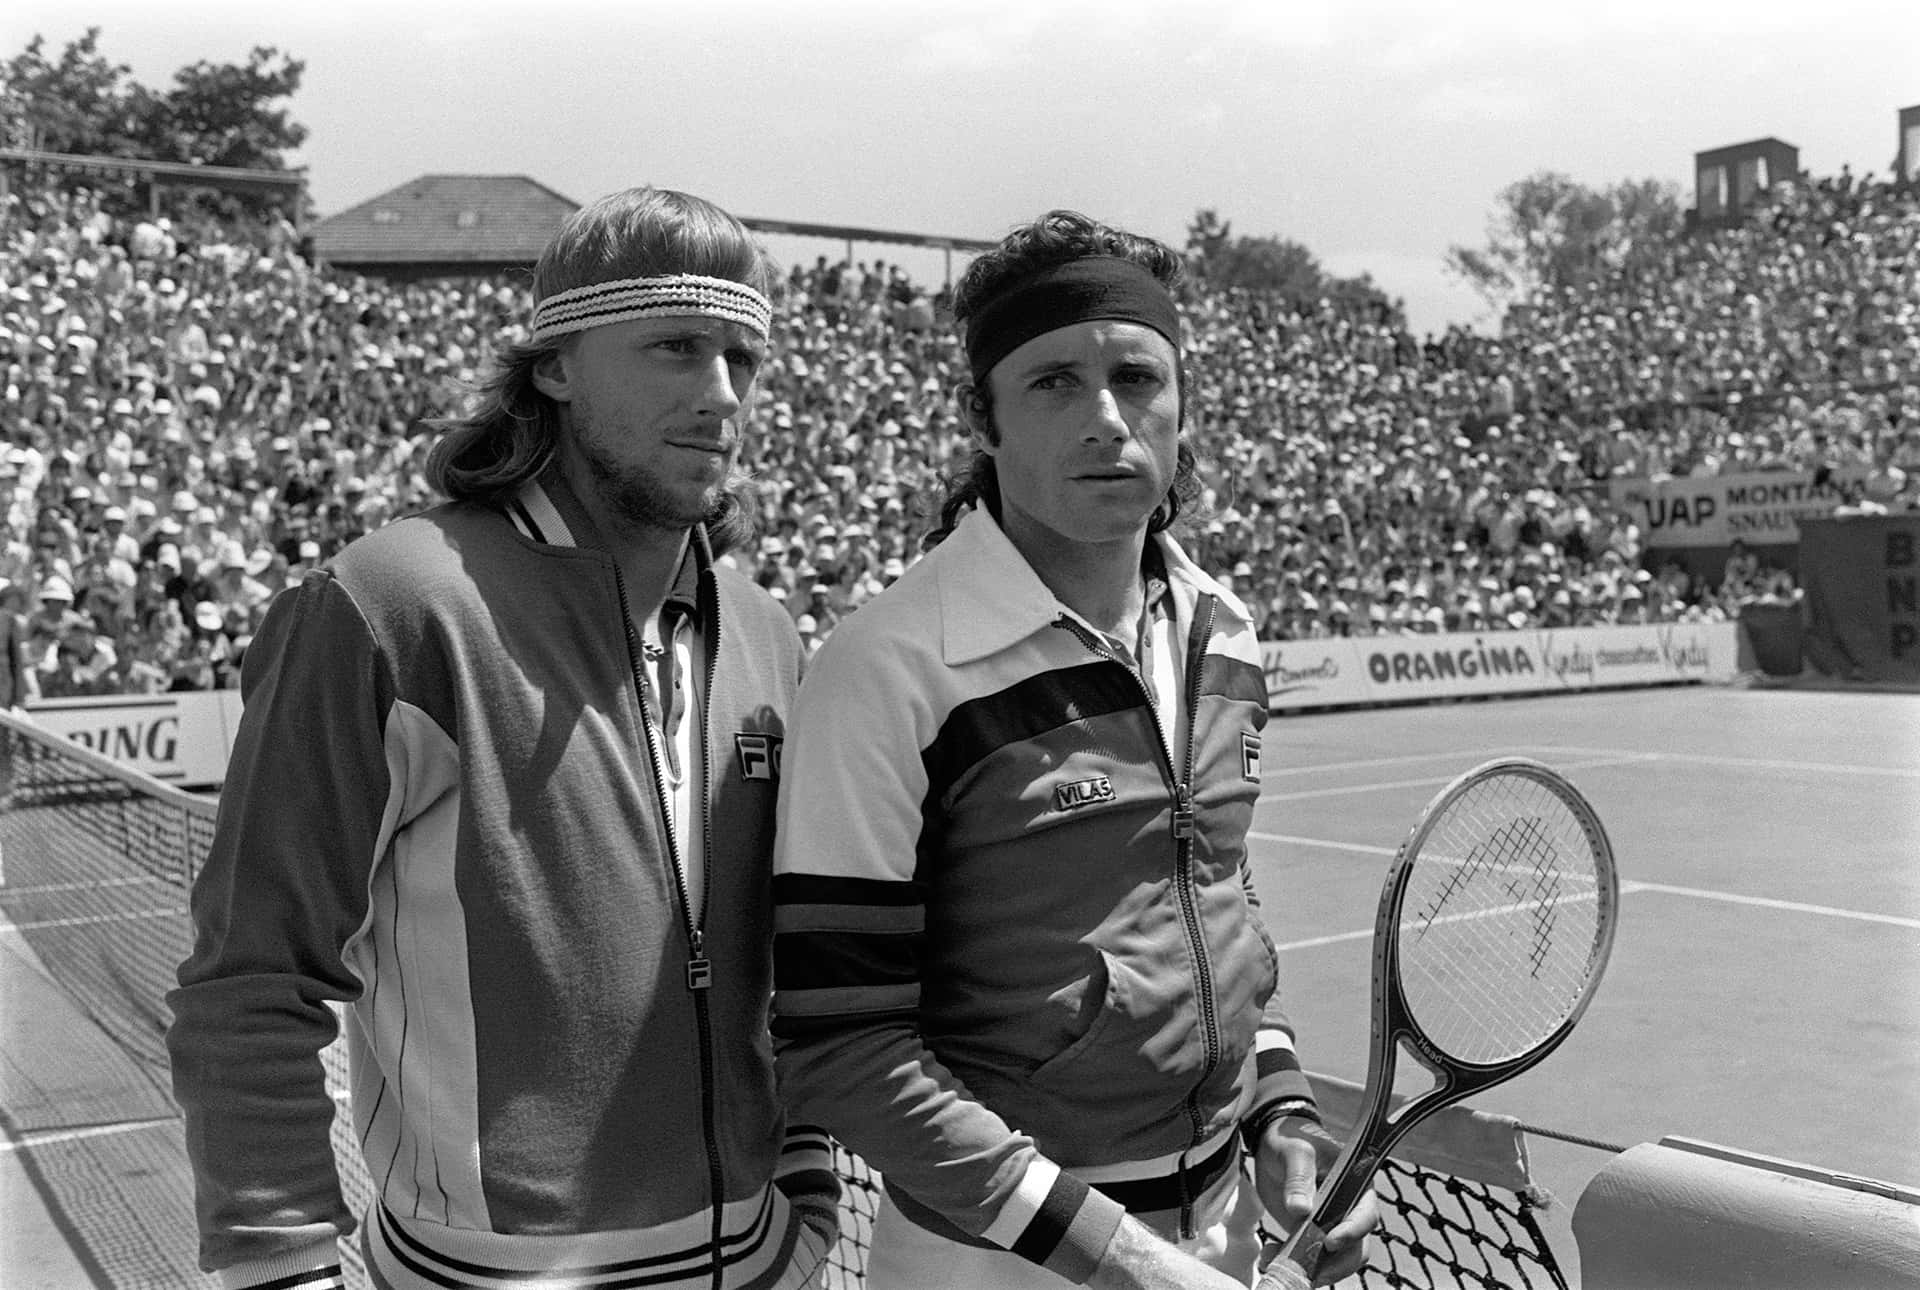 "Bjorn Borg and Guillermo Vilas at French Open Finals". Wallpaper